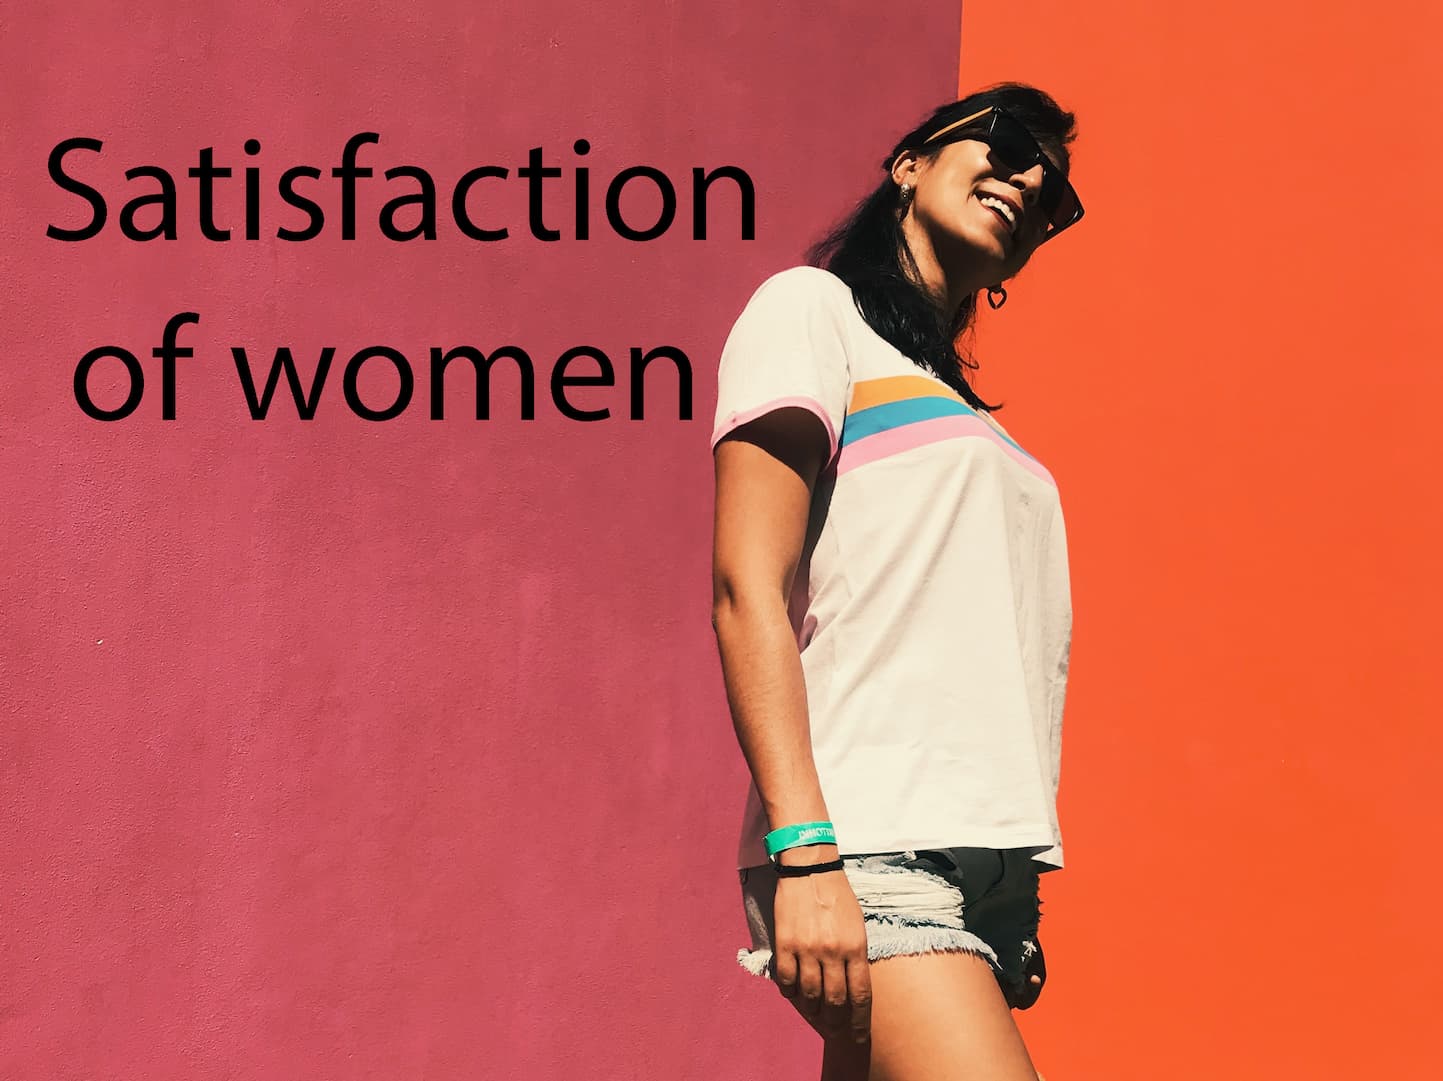 Satisfaction of women; Everything you need to know